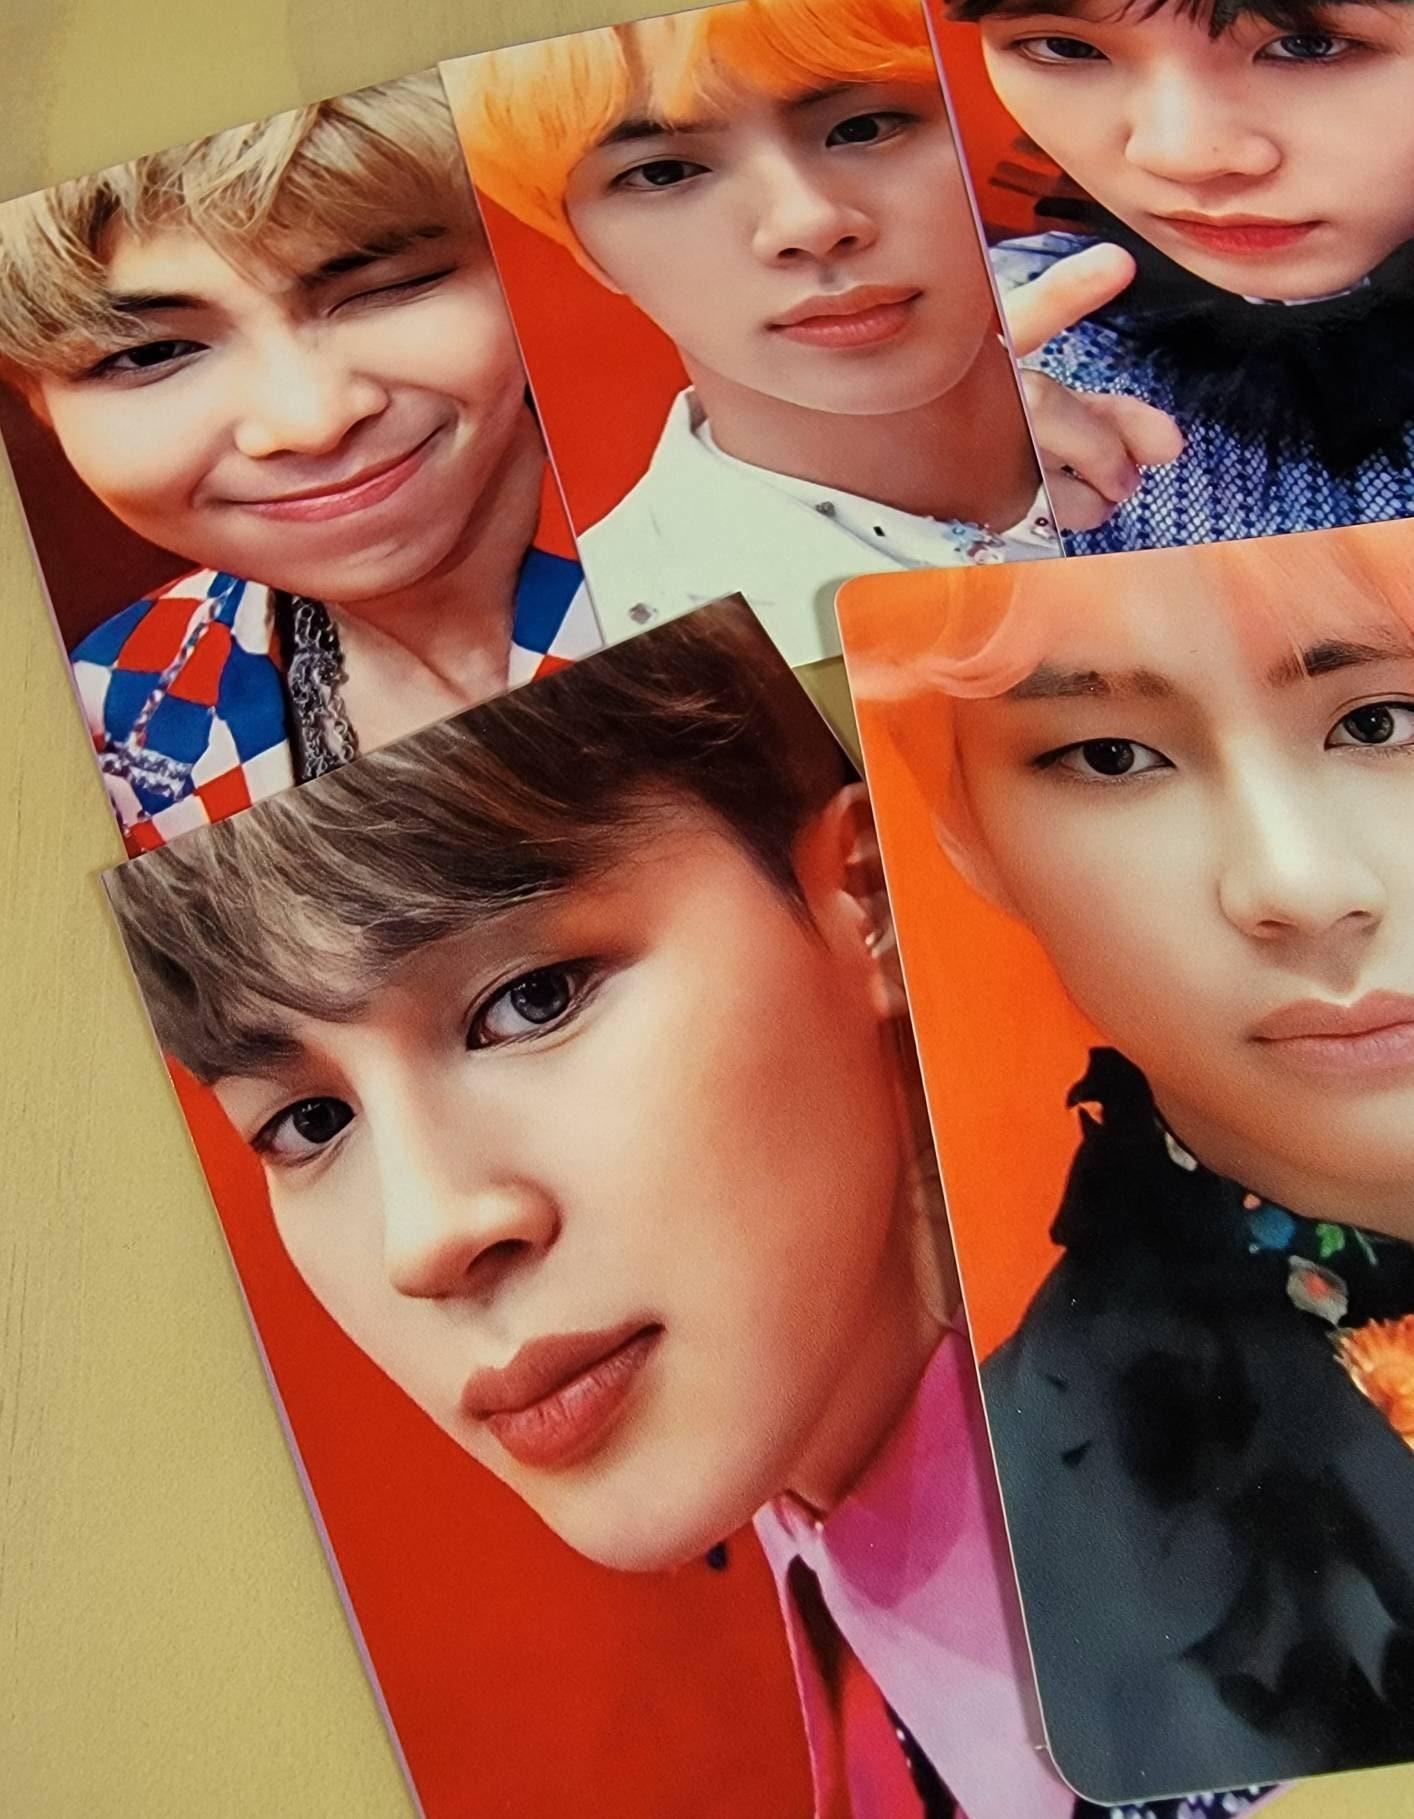 BTS LY Answer S Photocards